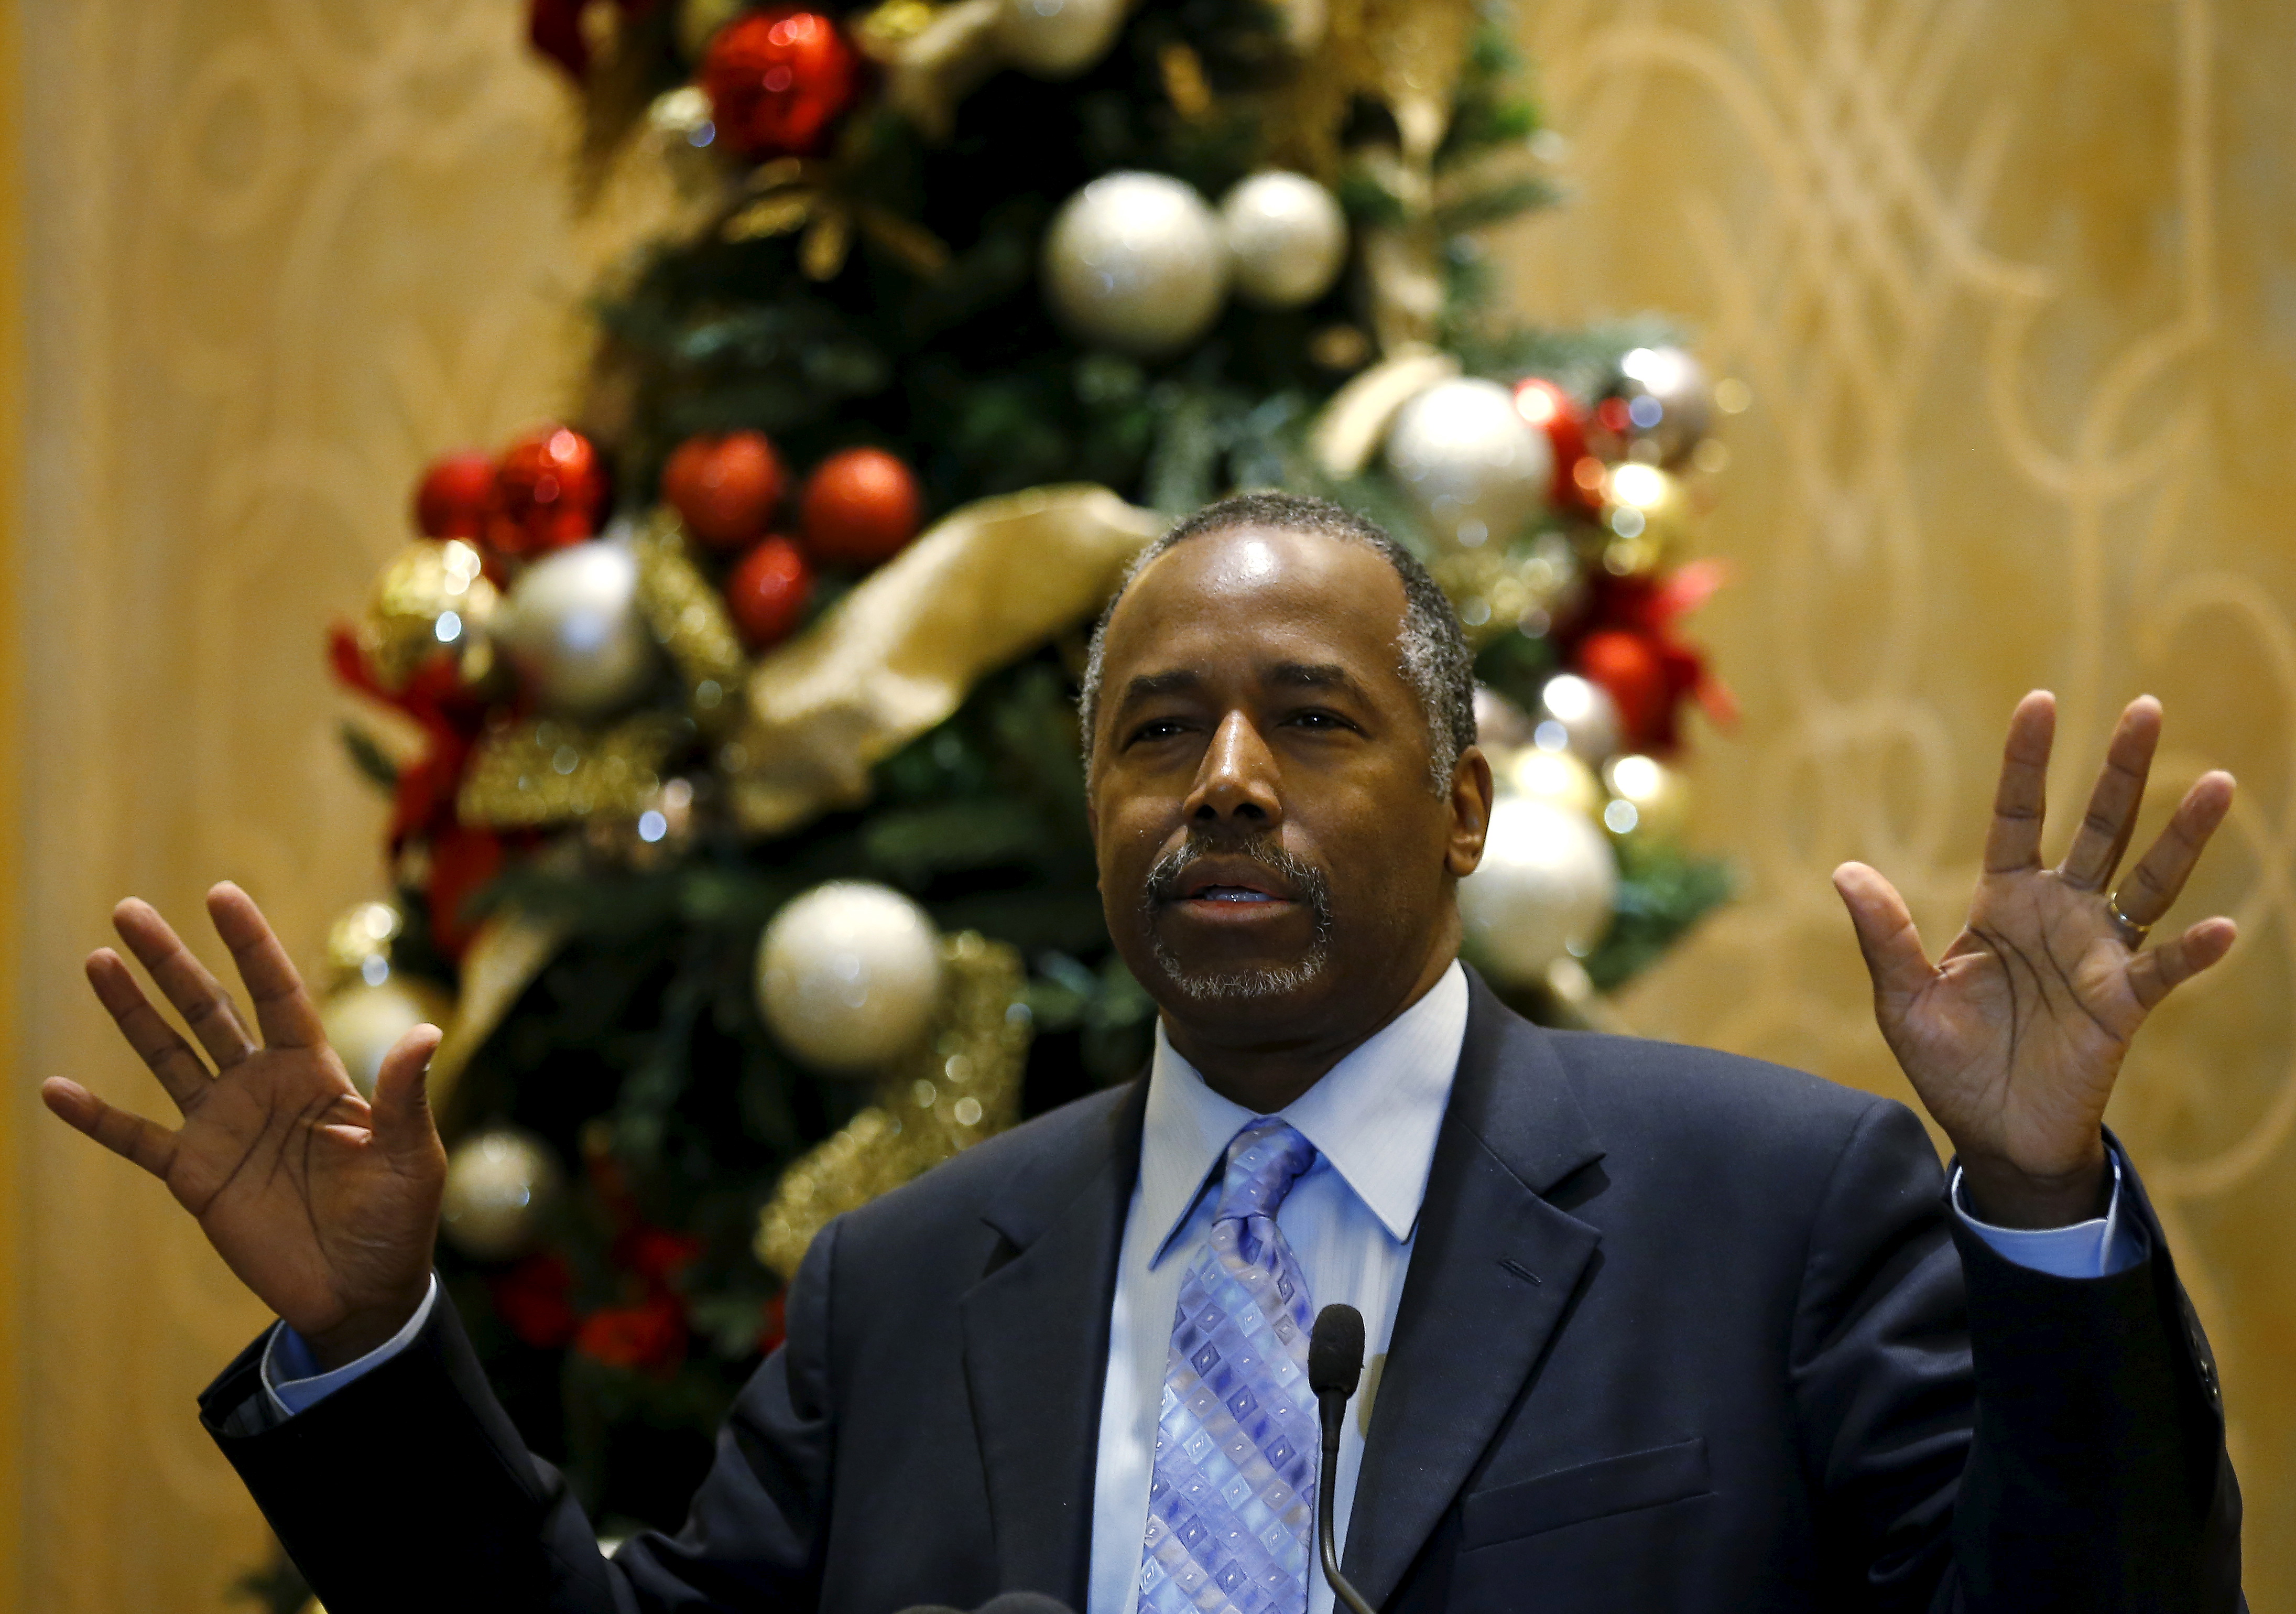 U.S. Republican presidential candidate Ben Carson speaks during a press conference in Chicago